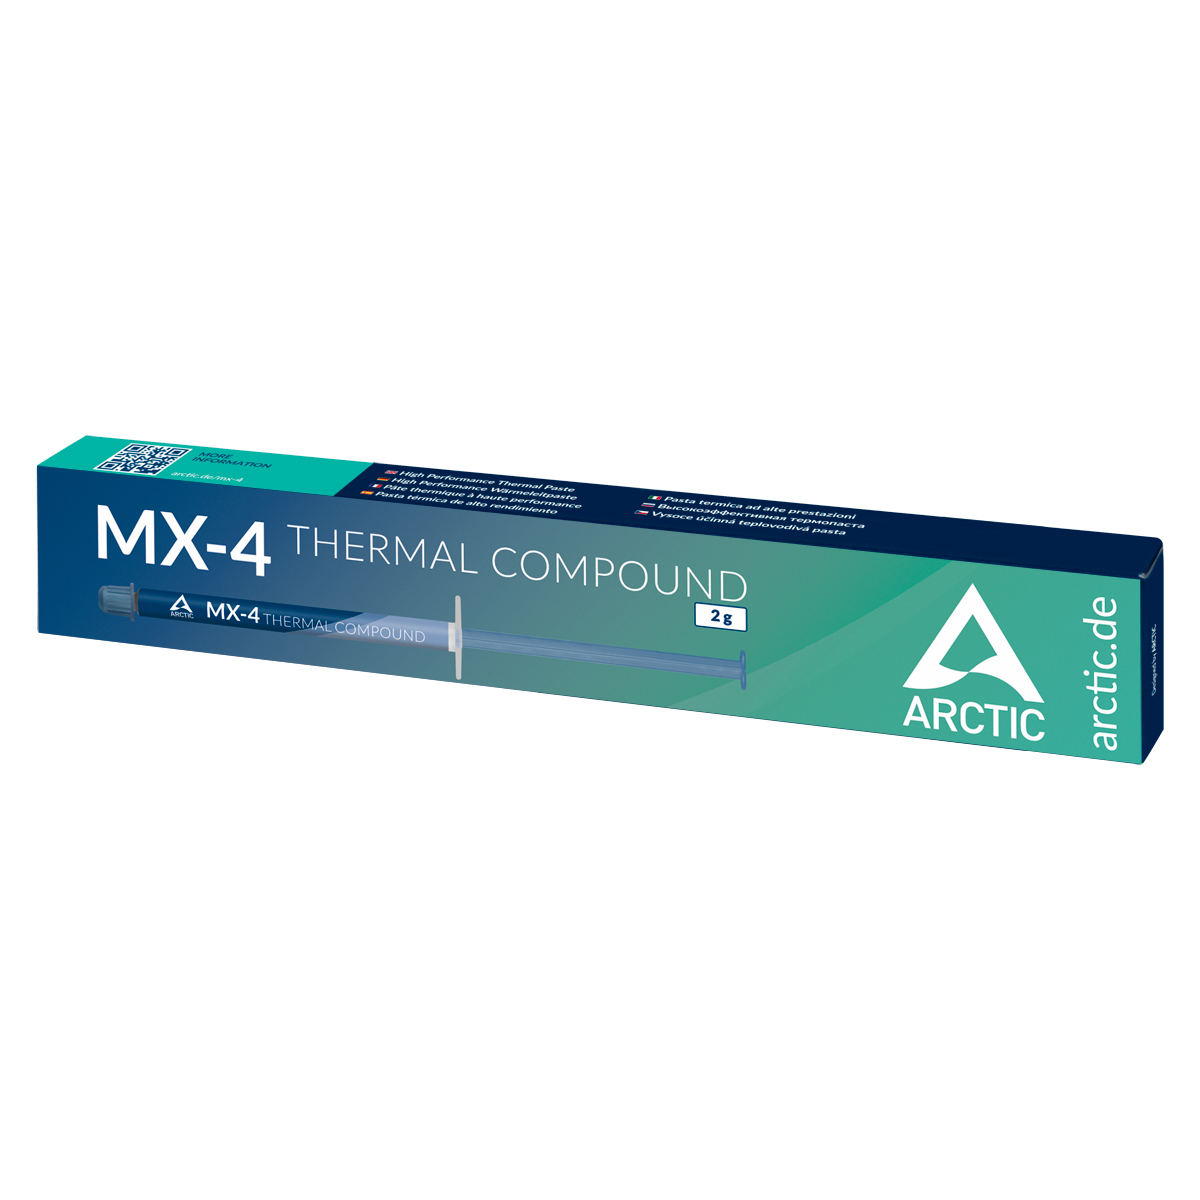 ARCTIC MX-4 (20 g) - Premium Performance Thermal Paste for all processors  (CPU, GPU - PC, PS4, XBOX), very high thermal conductivity, long  durability